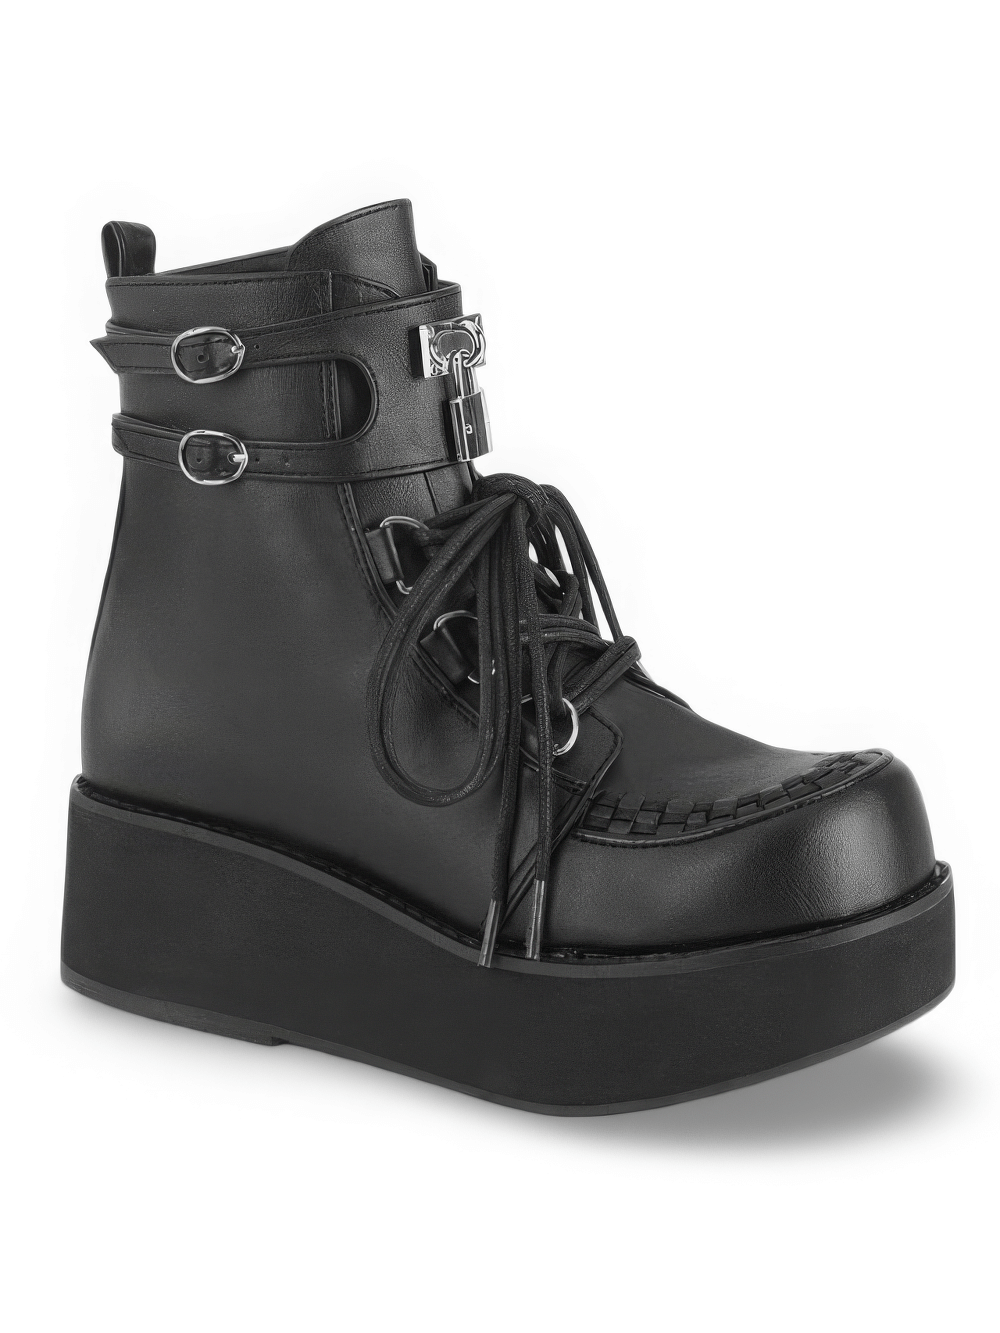 DEMONIA Platform Lace-Up Ankle Boots with Metal Lock Charm